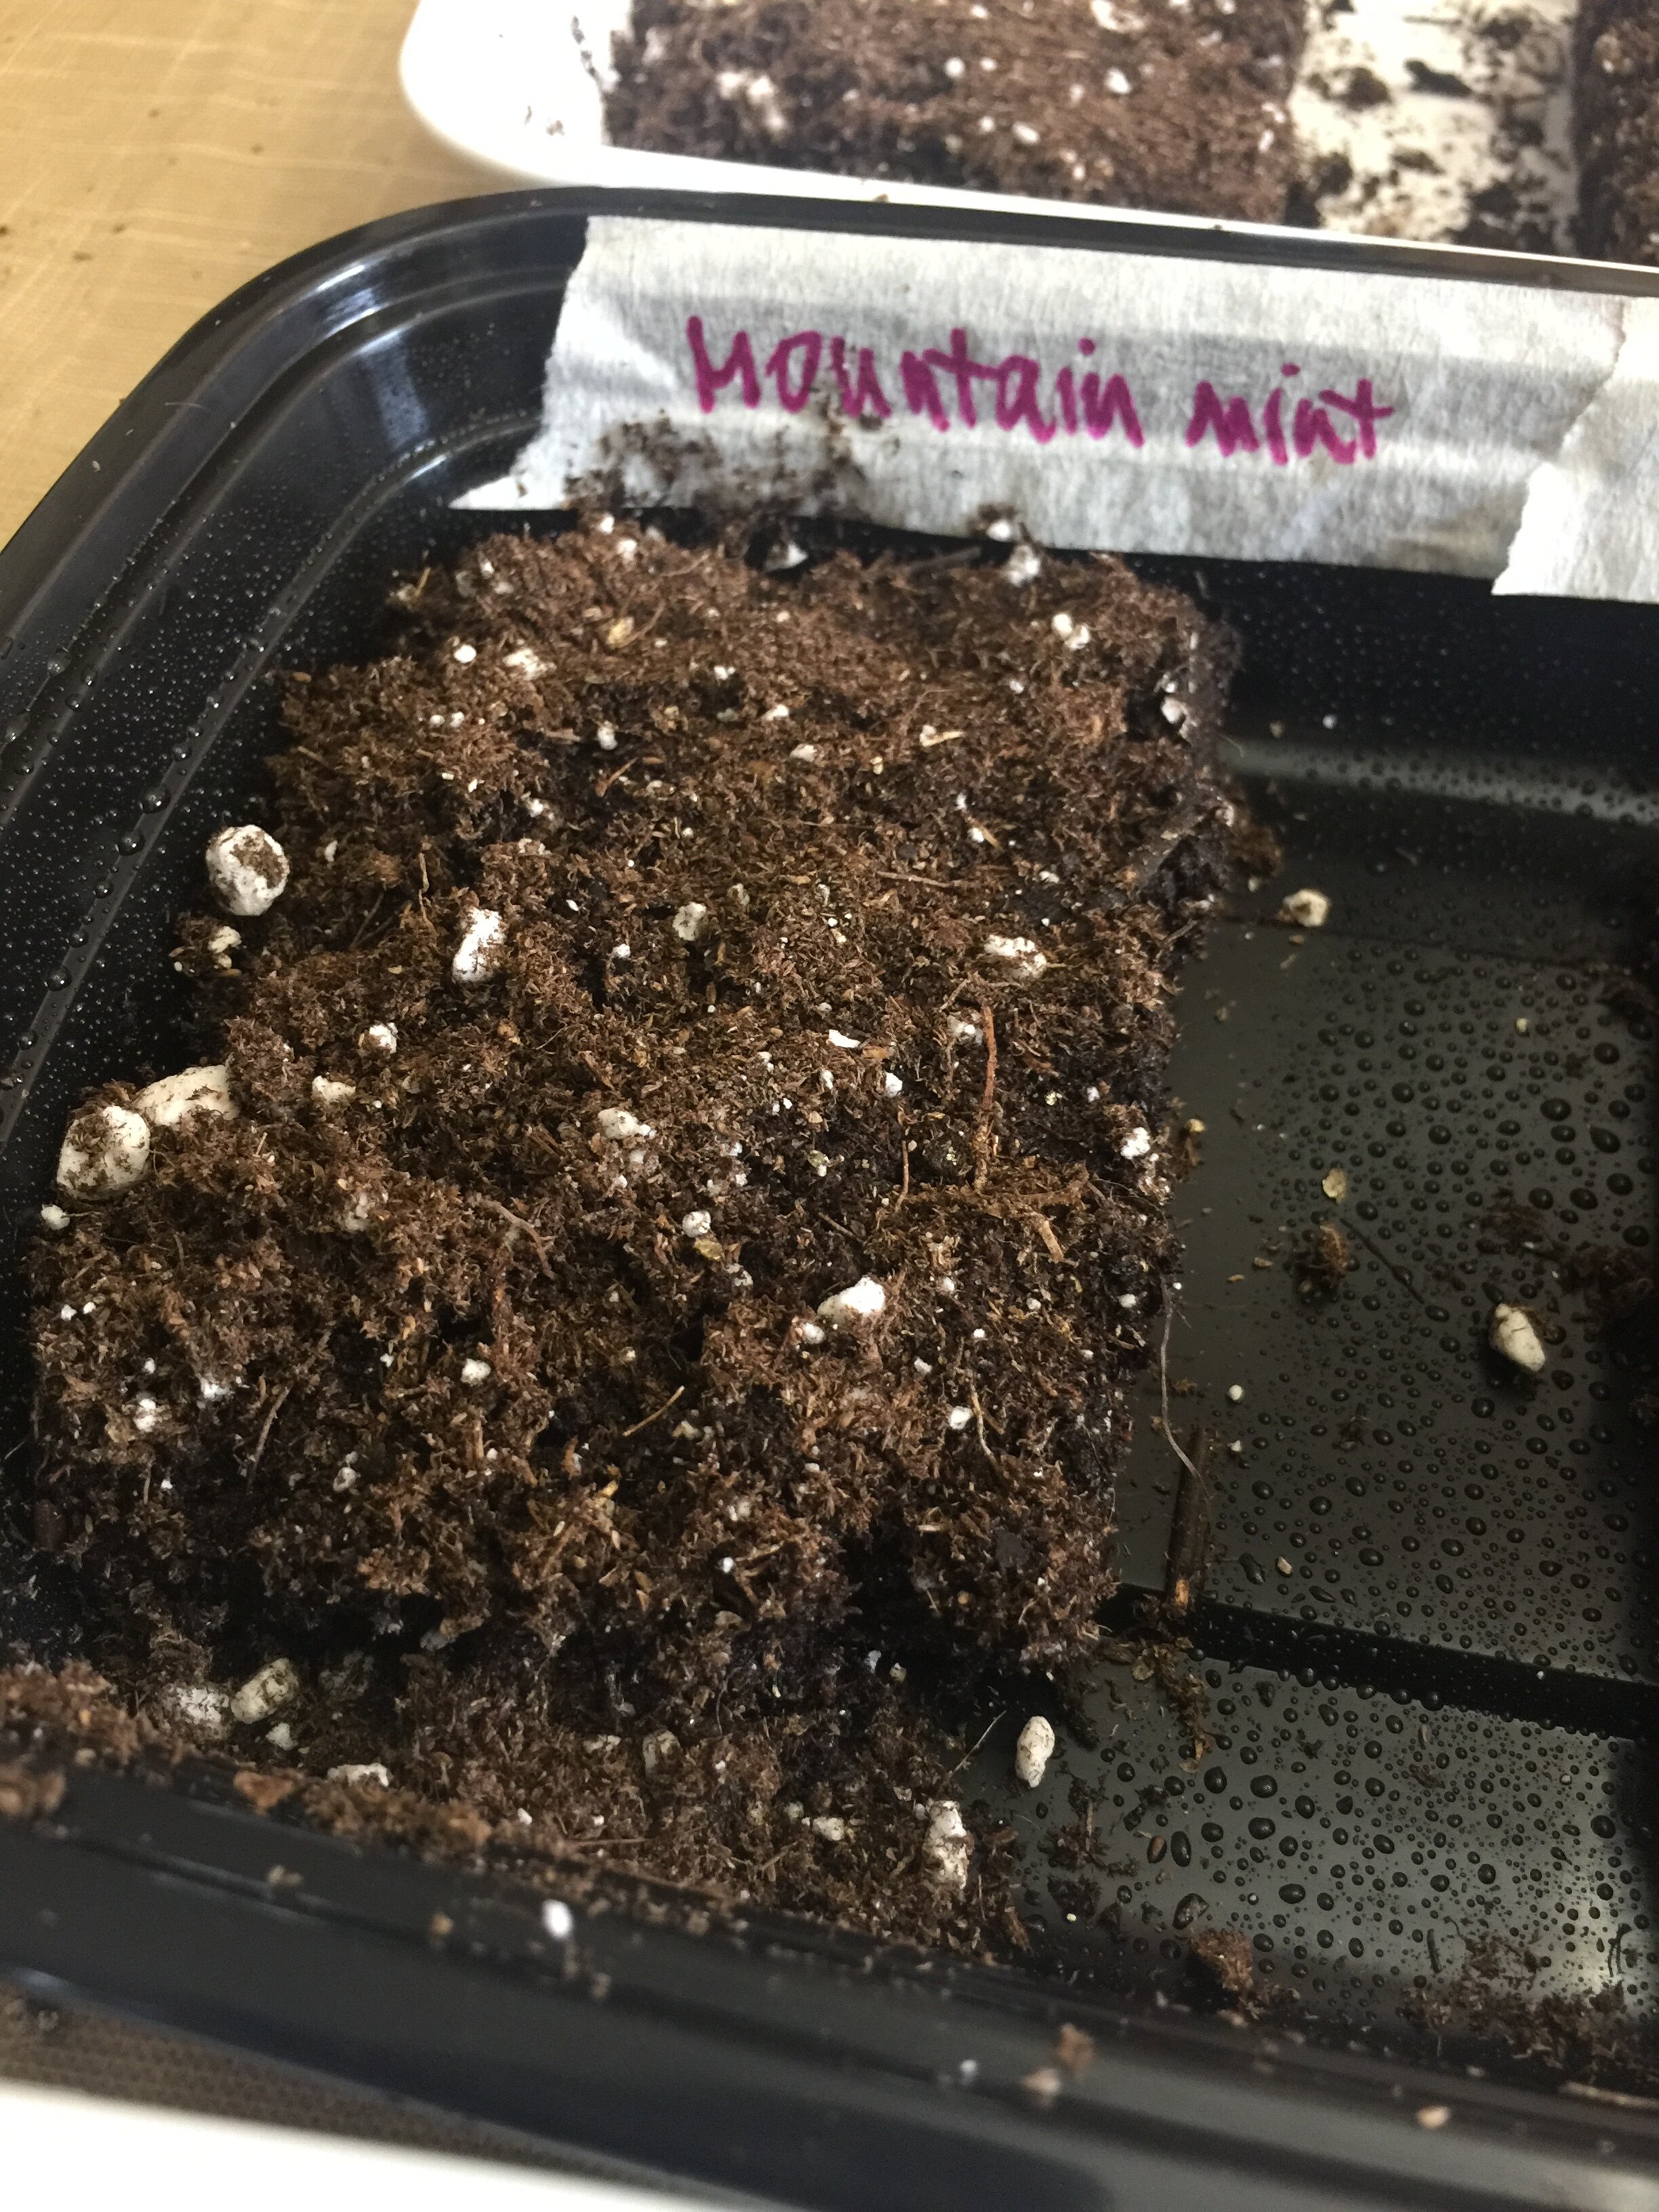 14. Sprinkle with Dry Soil to Cover